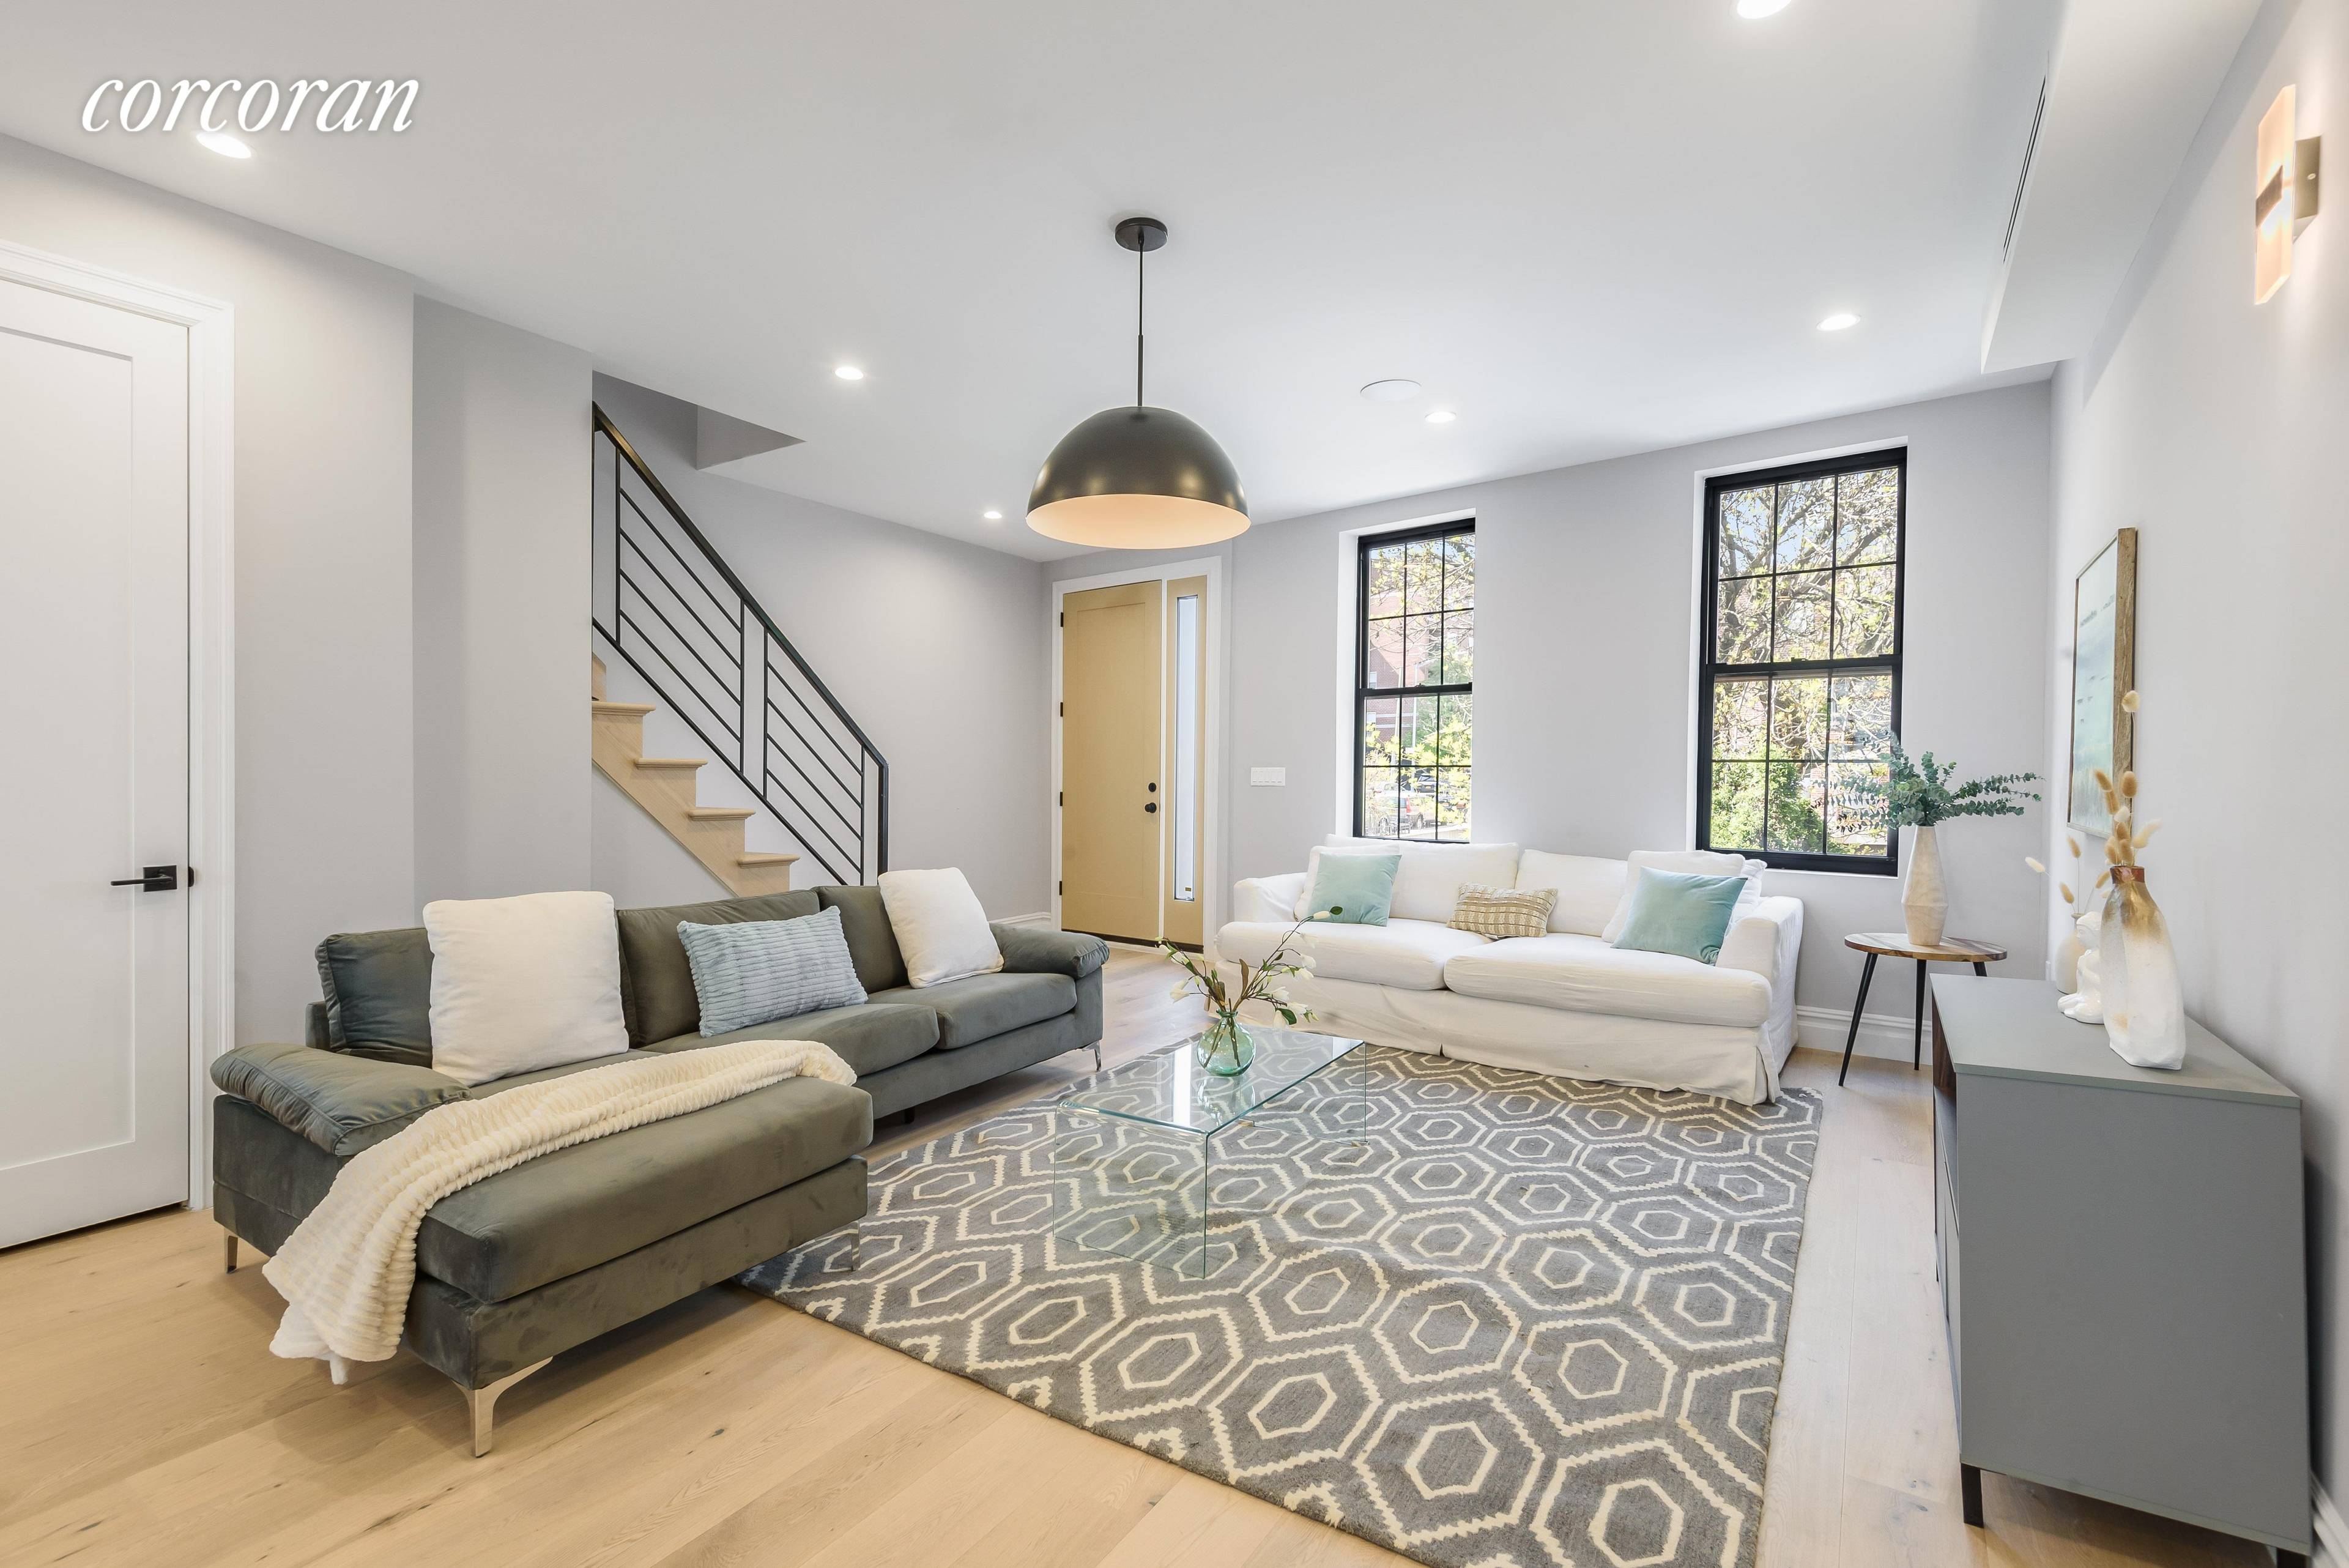 Welcome to 329 Prospect Avenue, a truly unique opportunity to own a fully renovated two family townhome, just three short blocks from beautiful Prospect Park, for only 2, 900, 000.